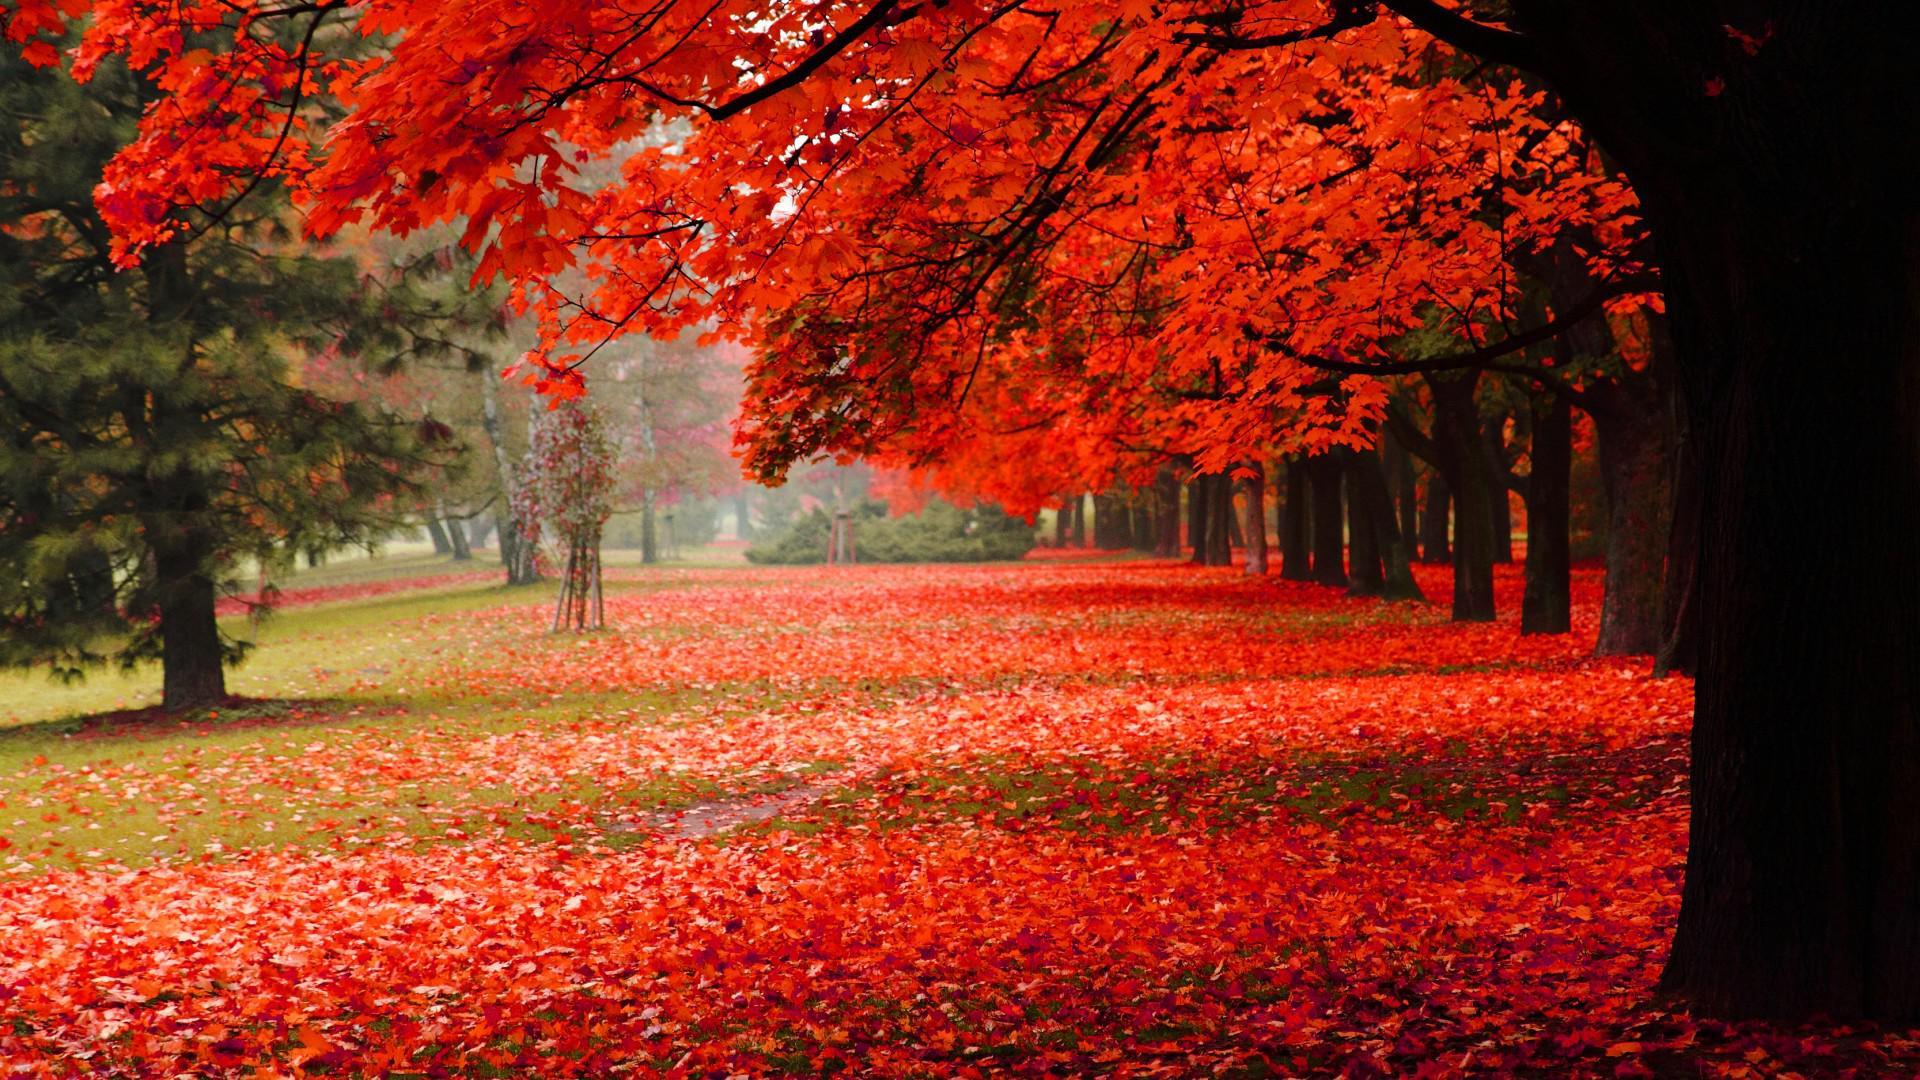 Natural, park, autumn, red leaves, autumn scenery HD free desktop